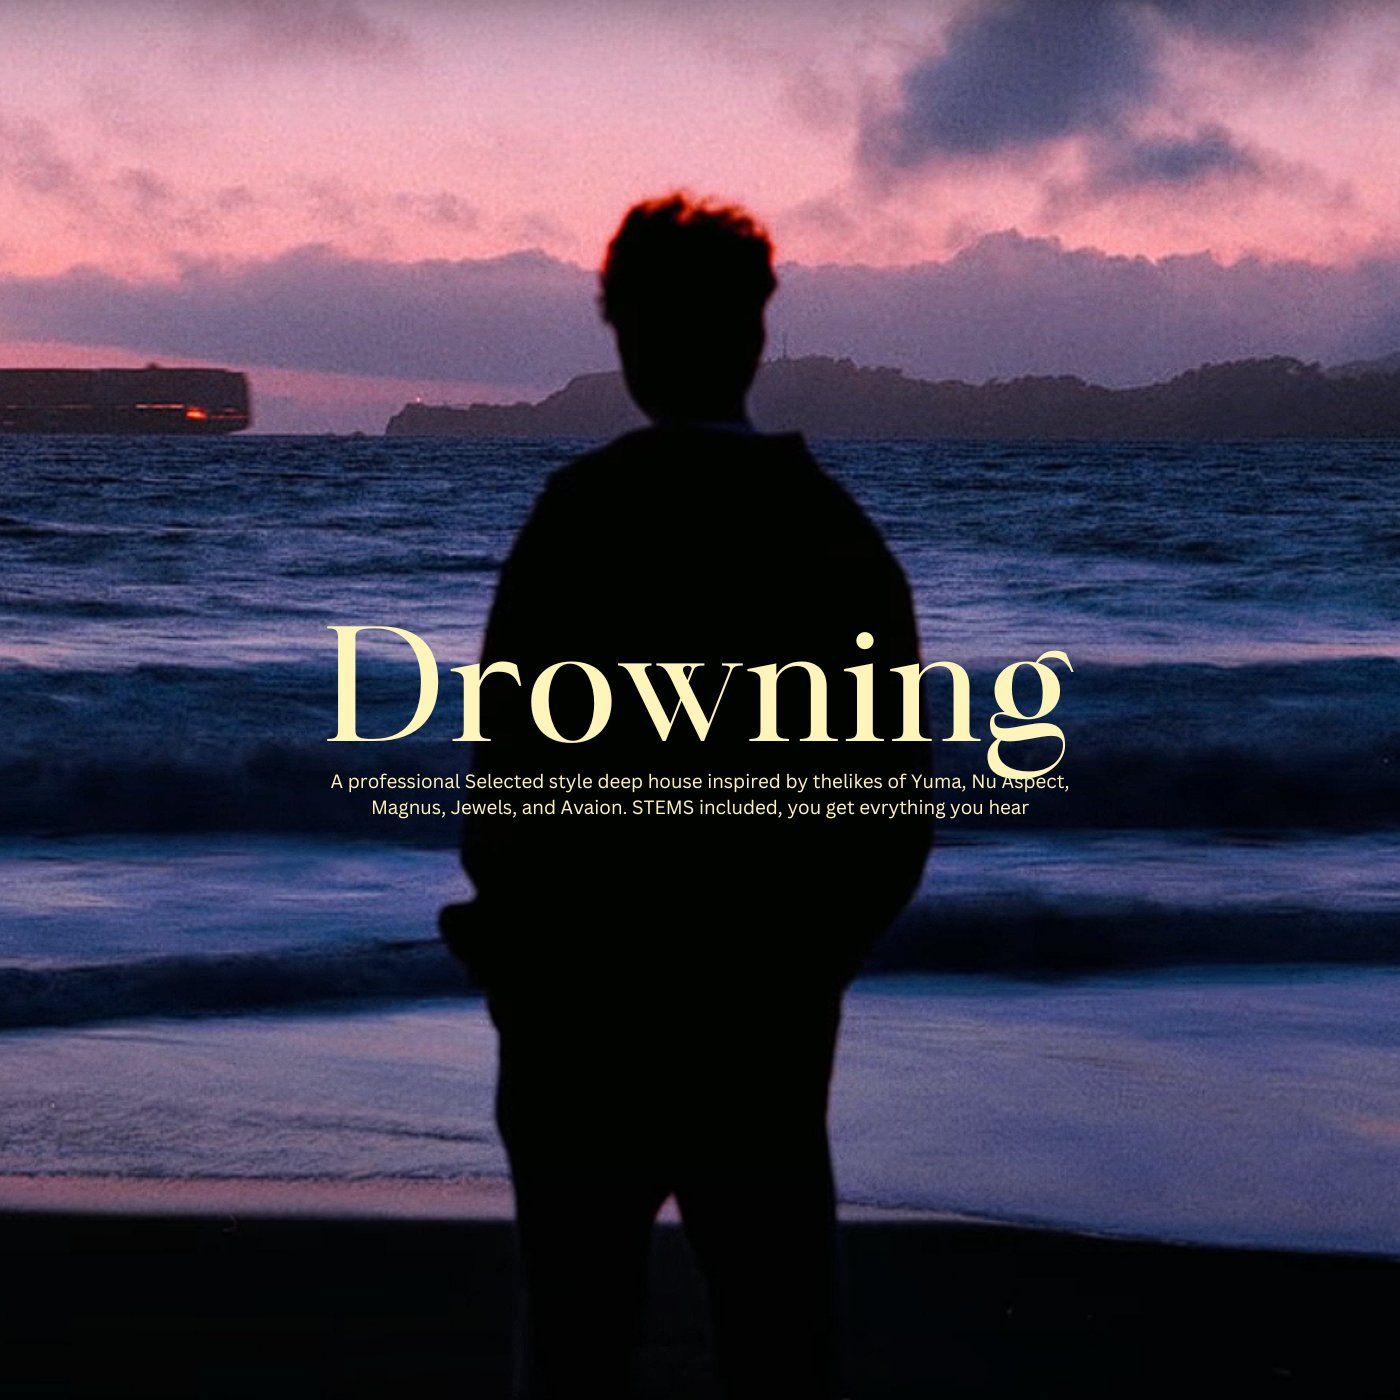 Drowning - LevelUp - Scraps Audio